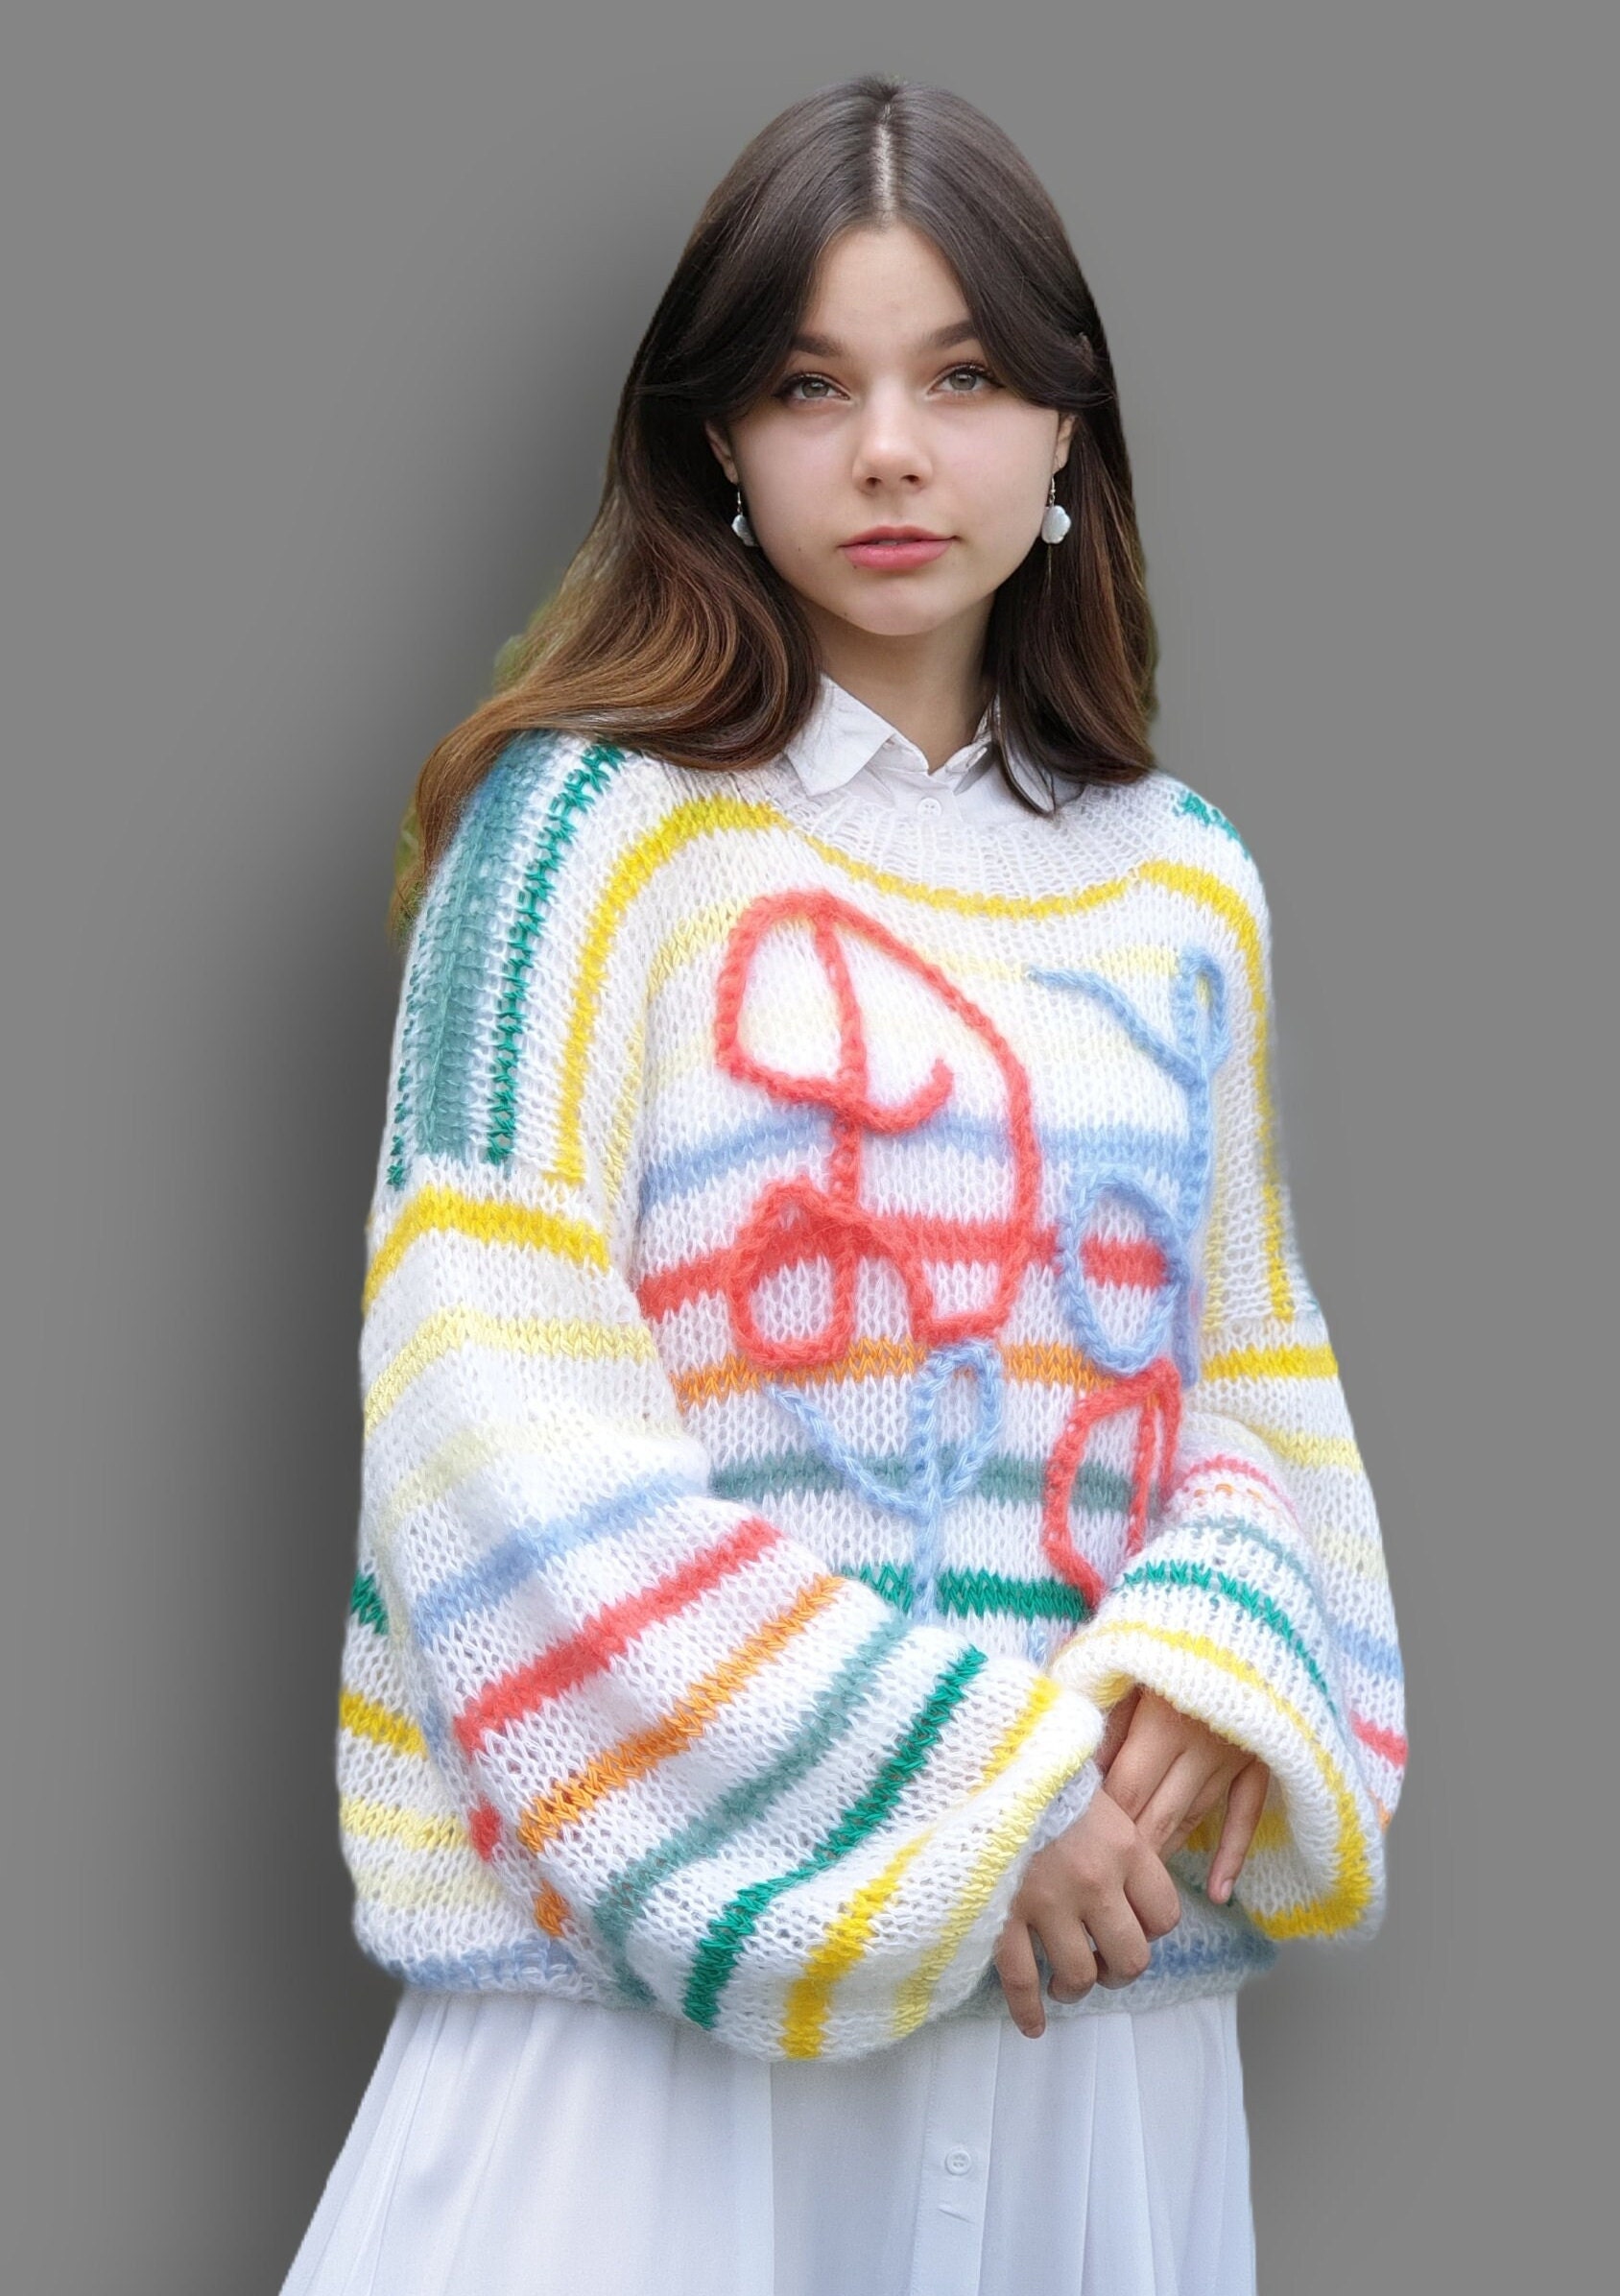 DialinyKnitwear Multicolor Knit Sweater Personalized Sweater Woman Rainbow Mohair Crew Neck Sweater Pullover Women Long Sleeve Colorful Pullover